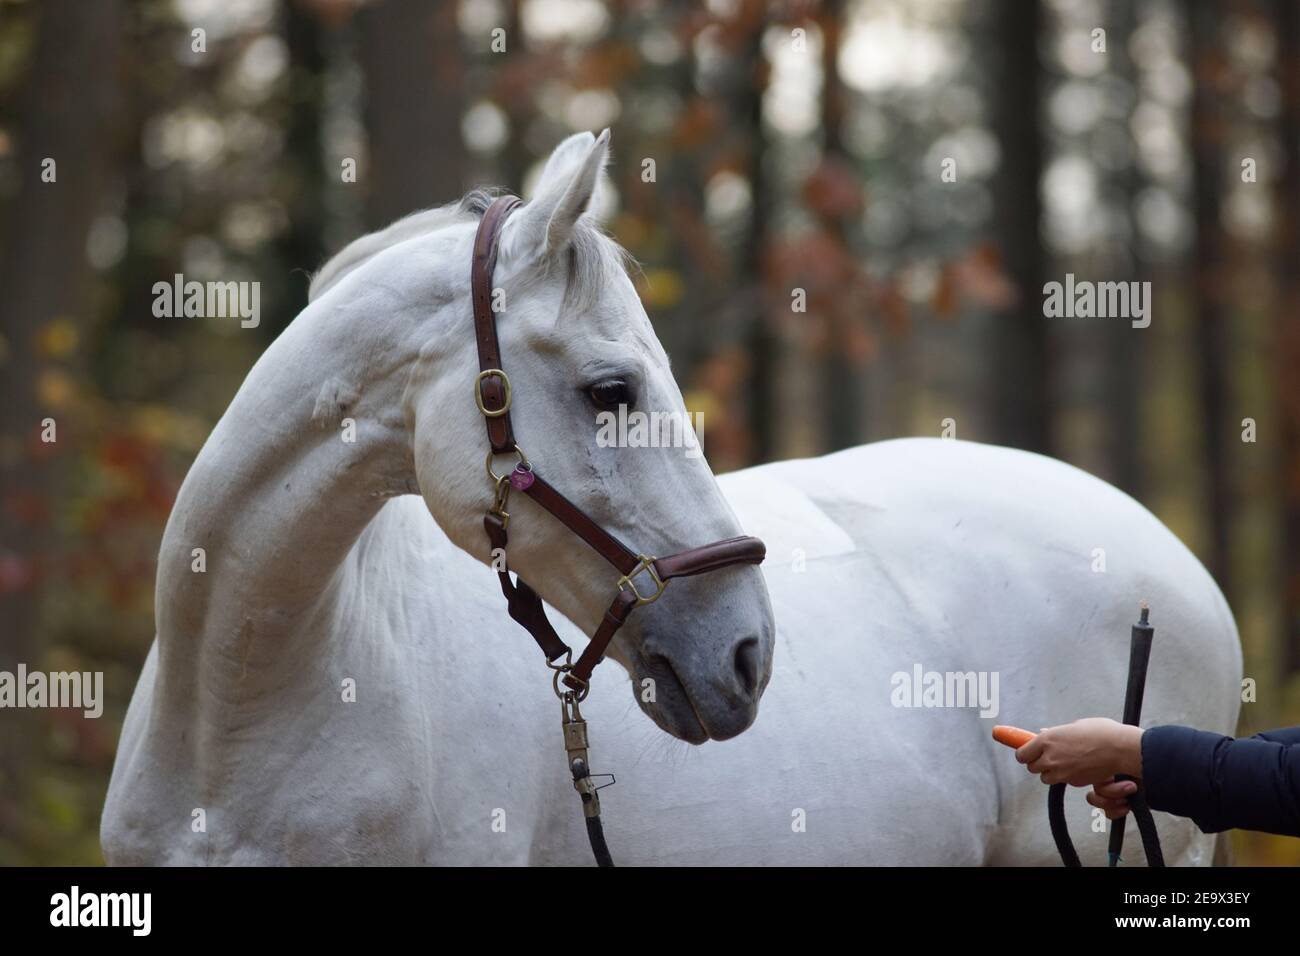 white horse and a hand with a carrot, doing ground work for relationship and trust building Stock Photo